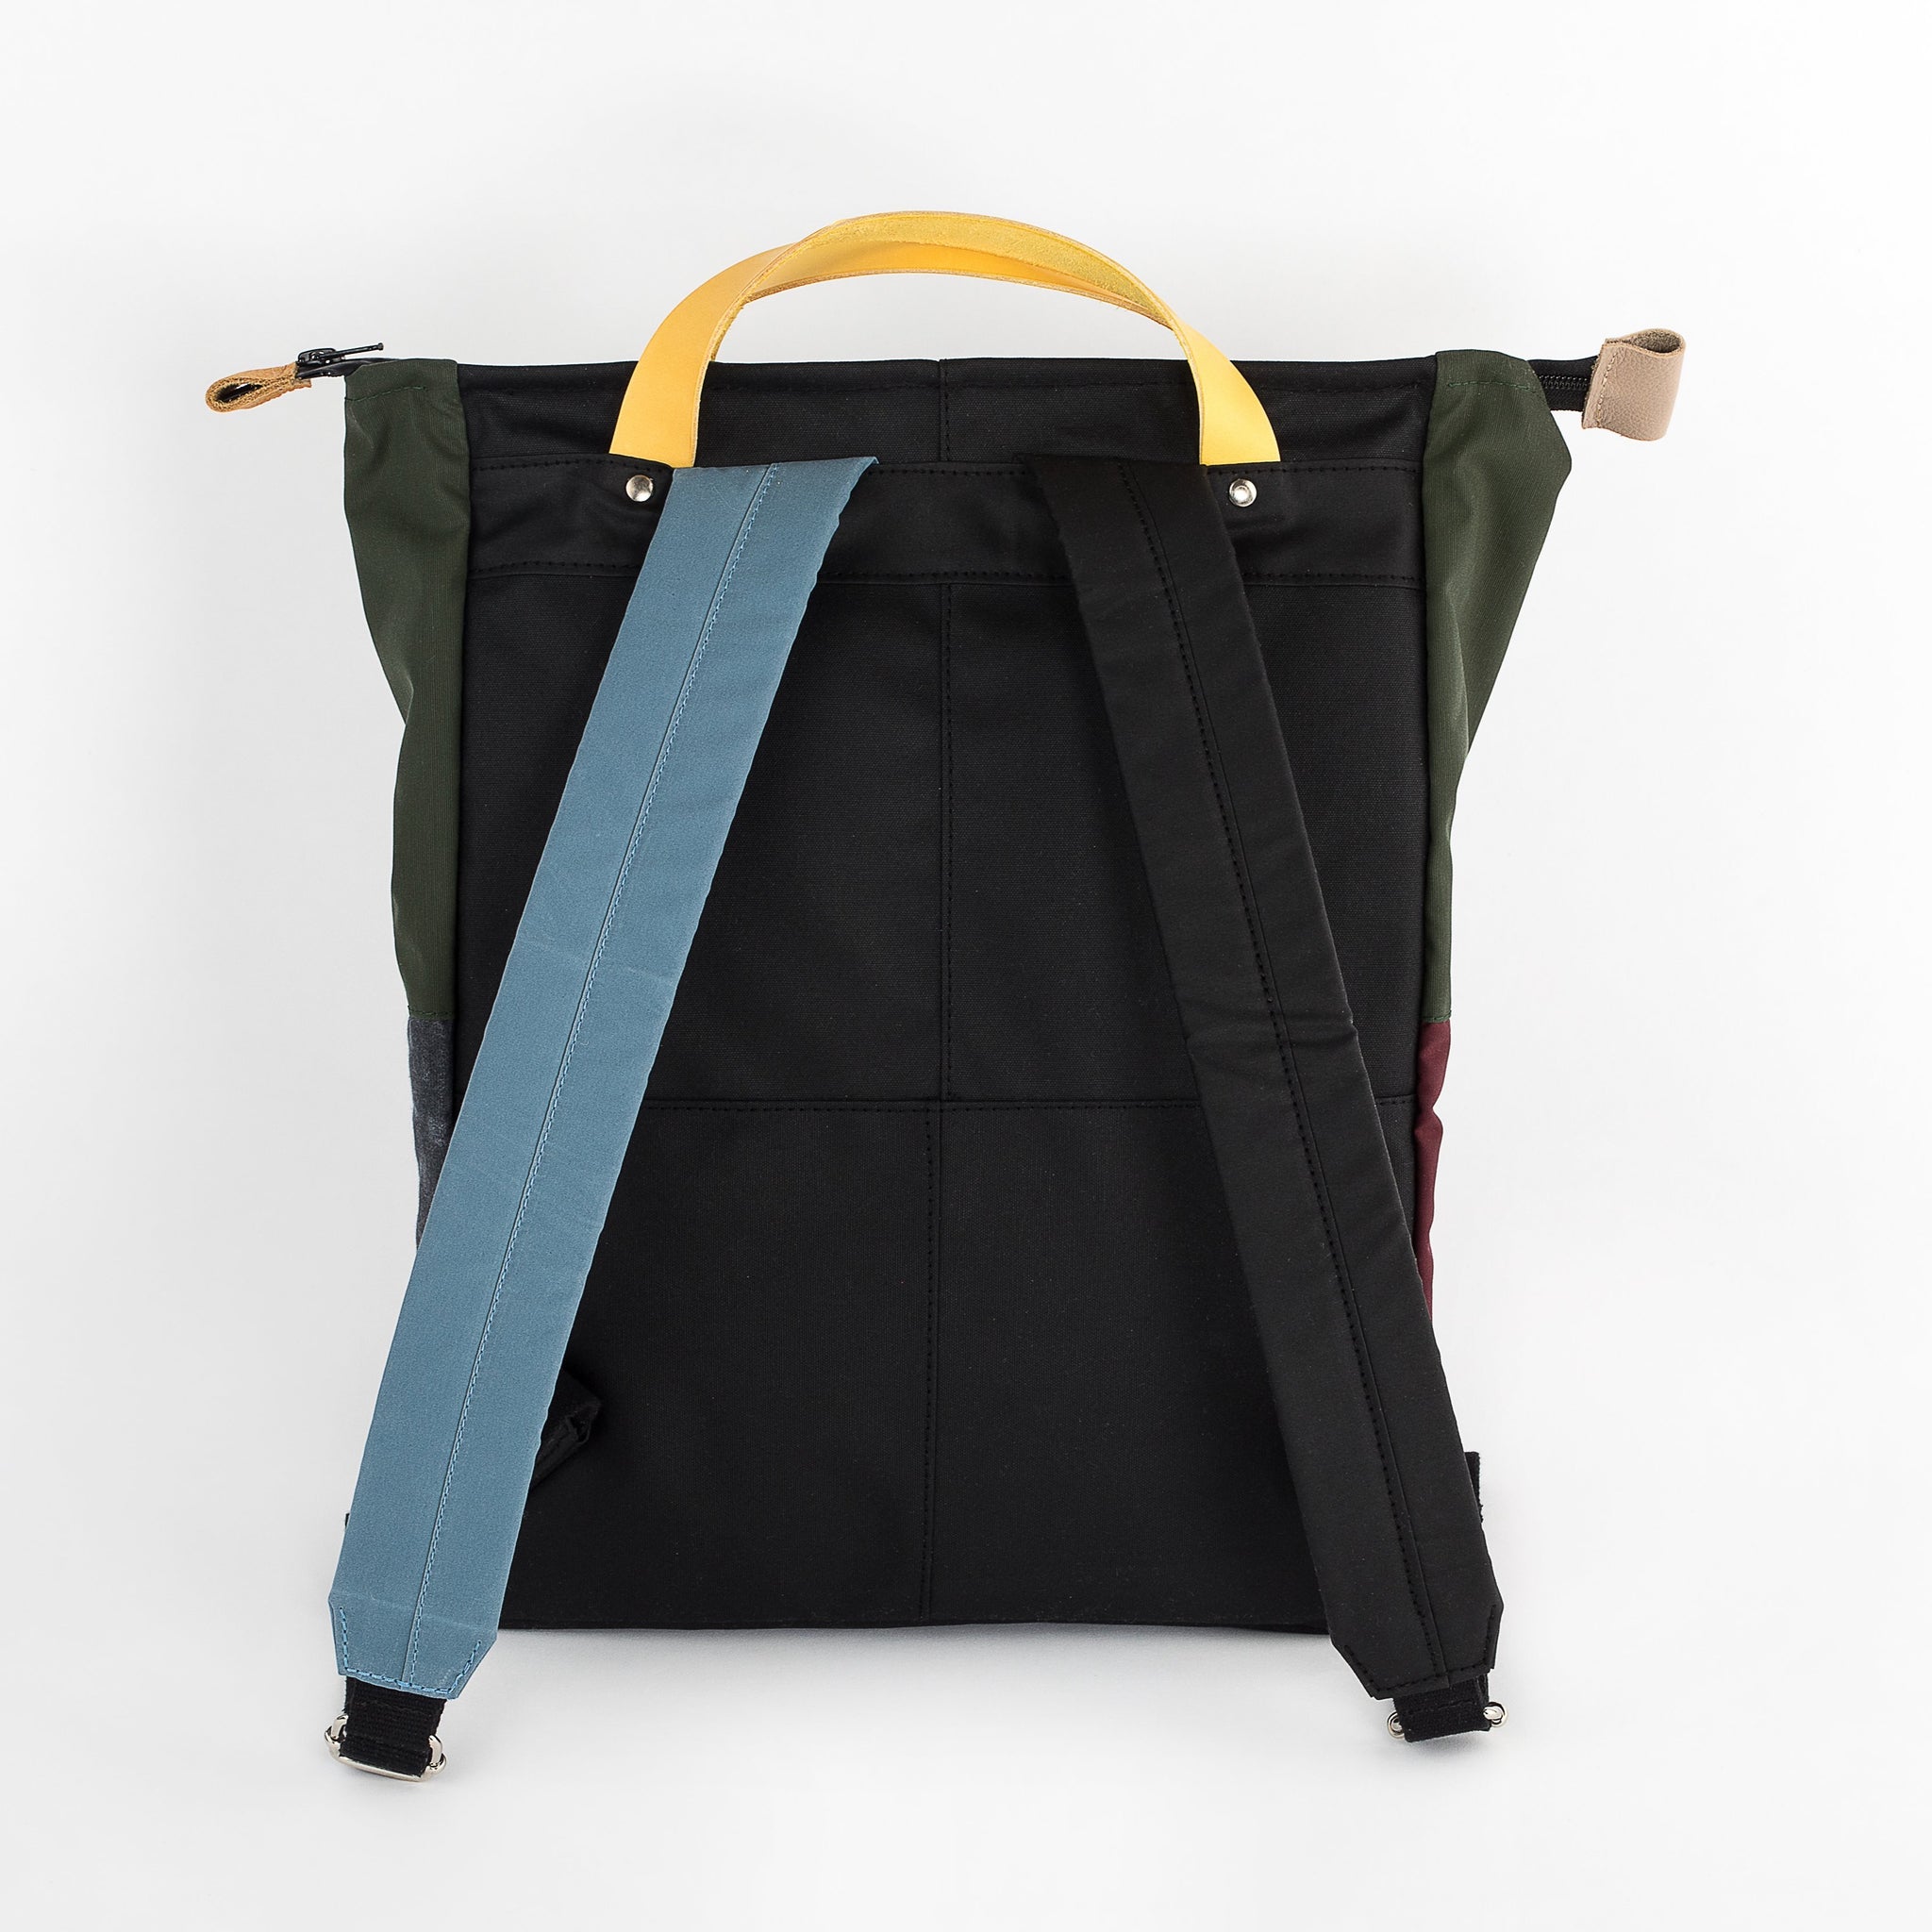 andthen.design an evolution of Vel-Oh.com-Dave | Backpack zero-1 odd straps backpack, colorblock, colourblock backpack, handmade using offcuts, zero waste backpack, sustainable backpack